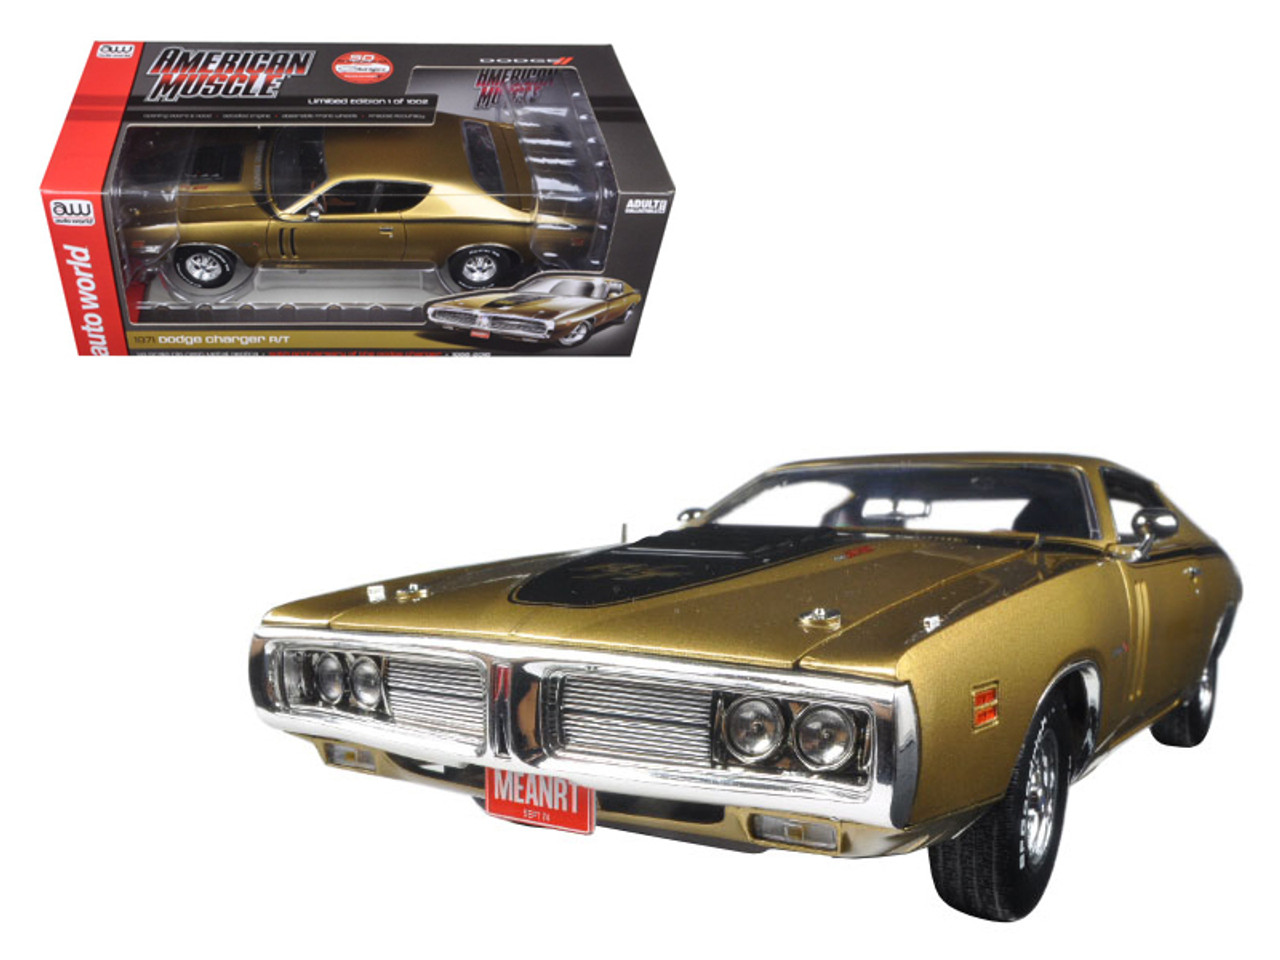 1971 Dodge Charger R/T 440 Six Pack 50th Anniversary GY8 Metallic Gold Limited Edition to 1002pc 1/18 Diecast Model Car by Autoworld